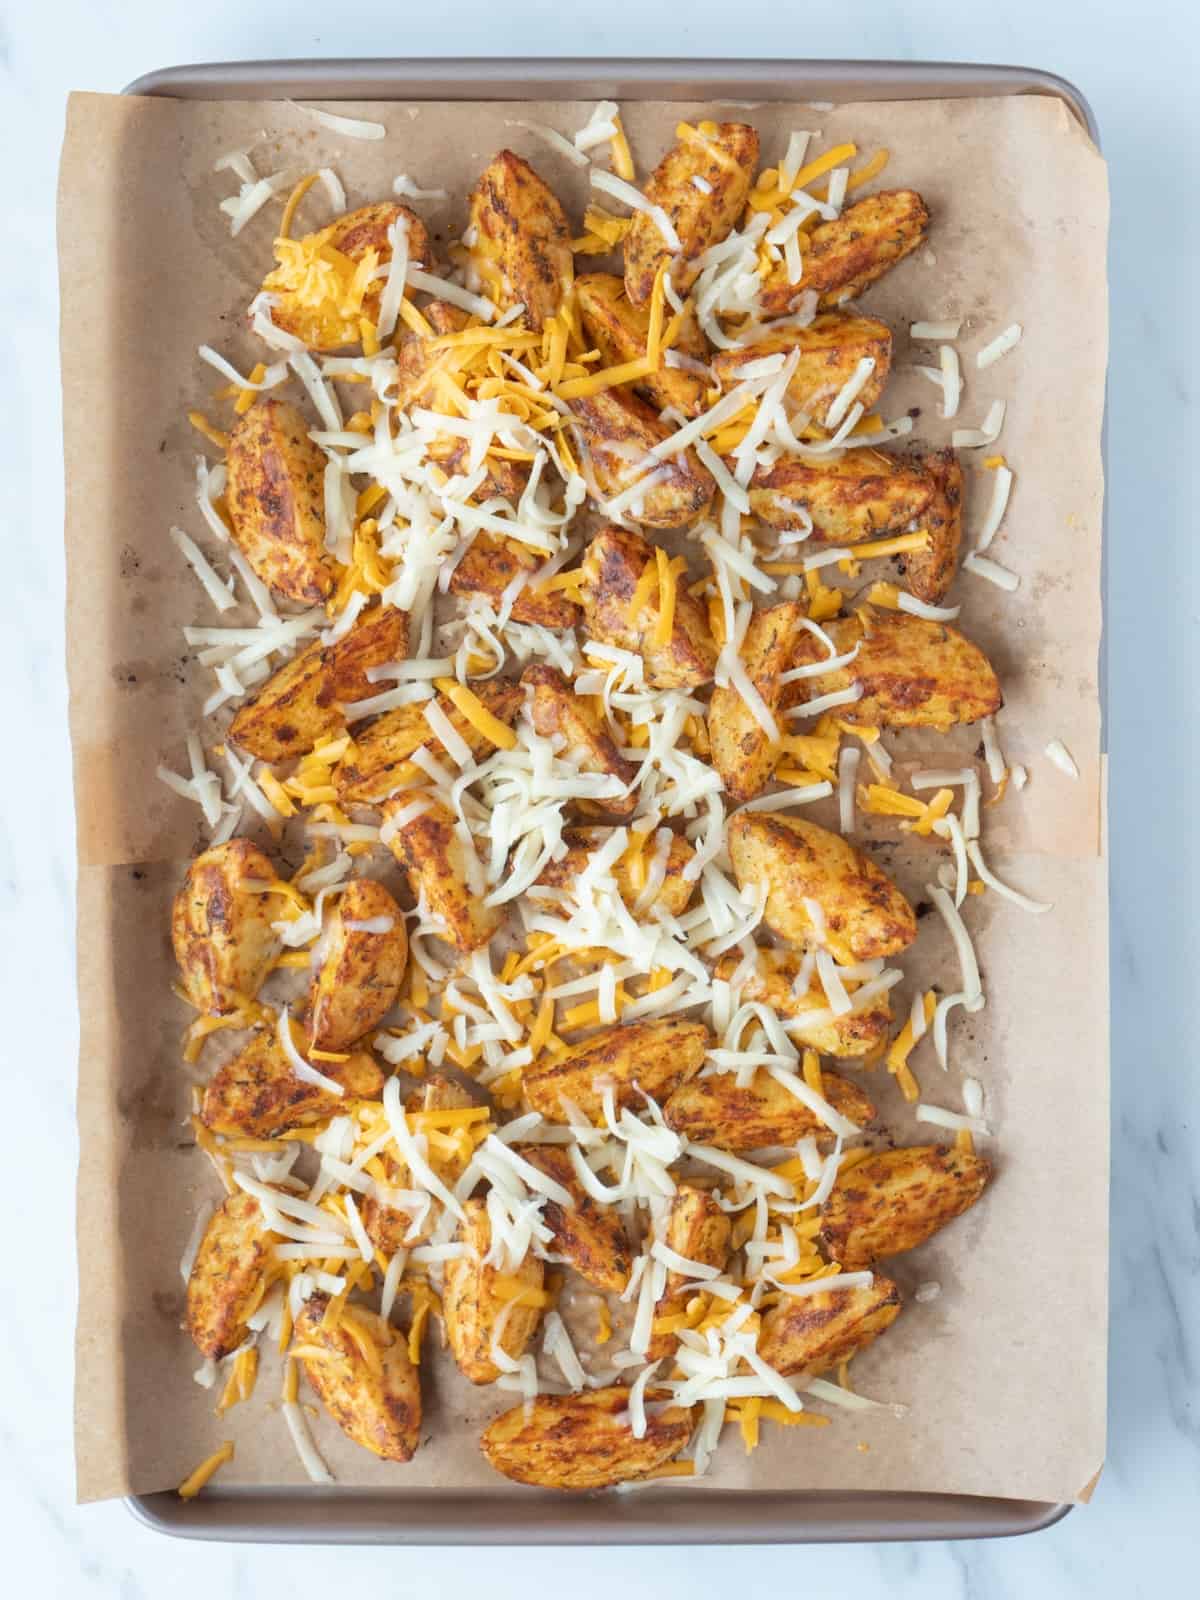 A parchment-lined baking sheet with quartered potatoes, roasted in the oven, topped with shredded cheese.